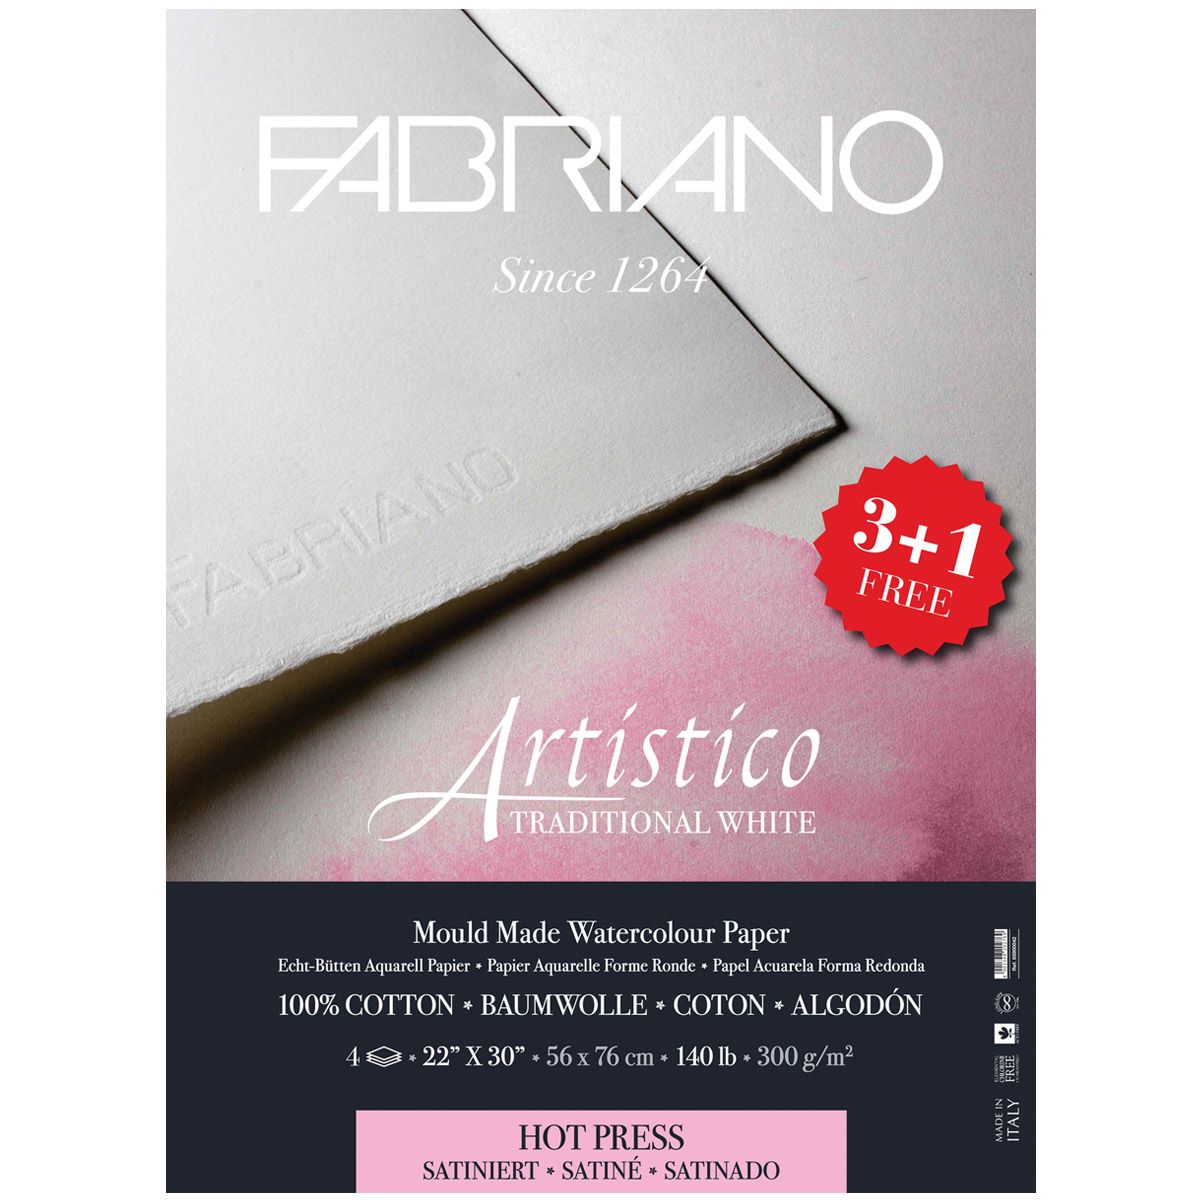 Fabriano Artistico Traditional White HP 140lbs 22”x30” Buy 3 Get 1 Free